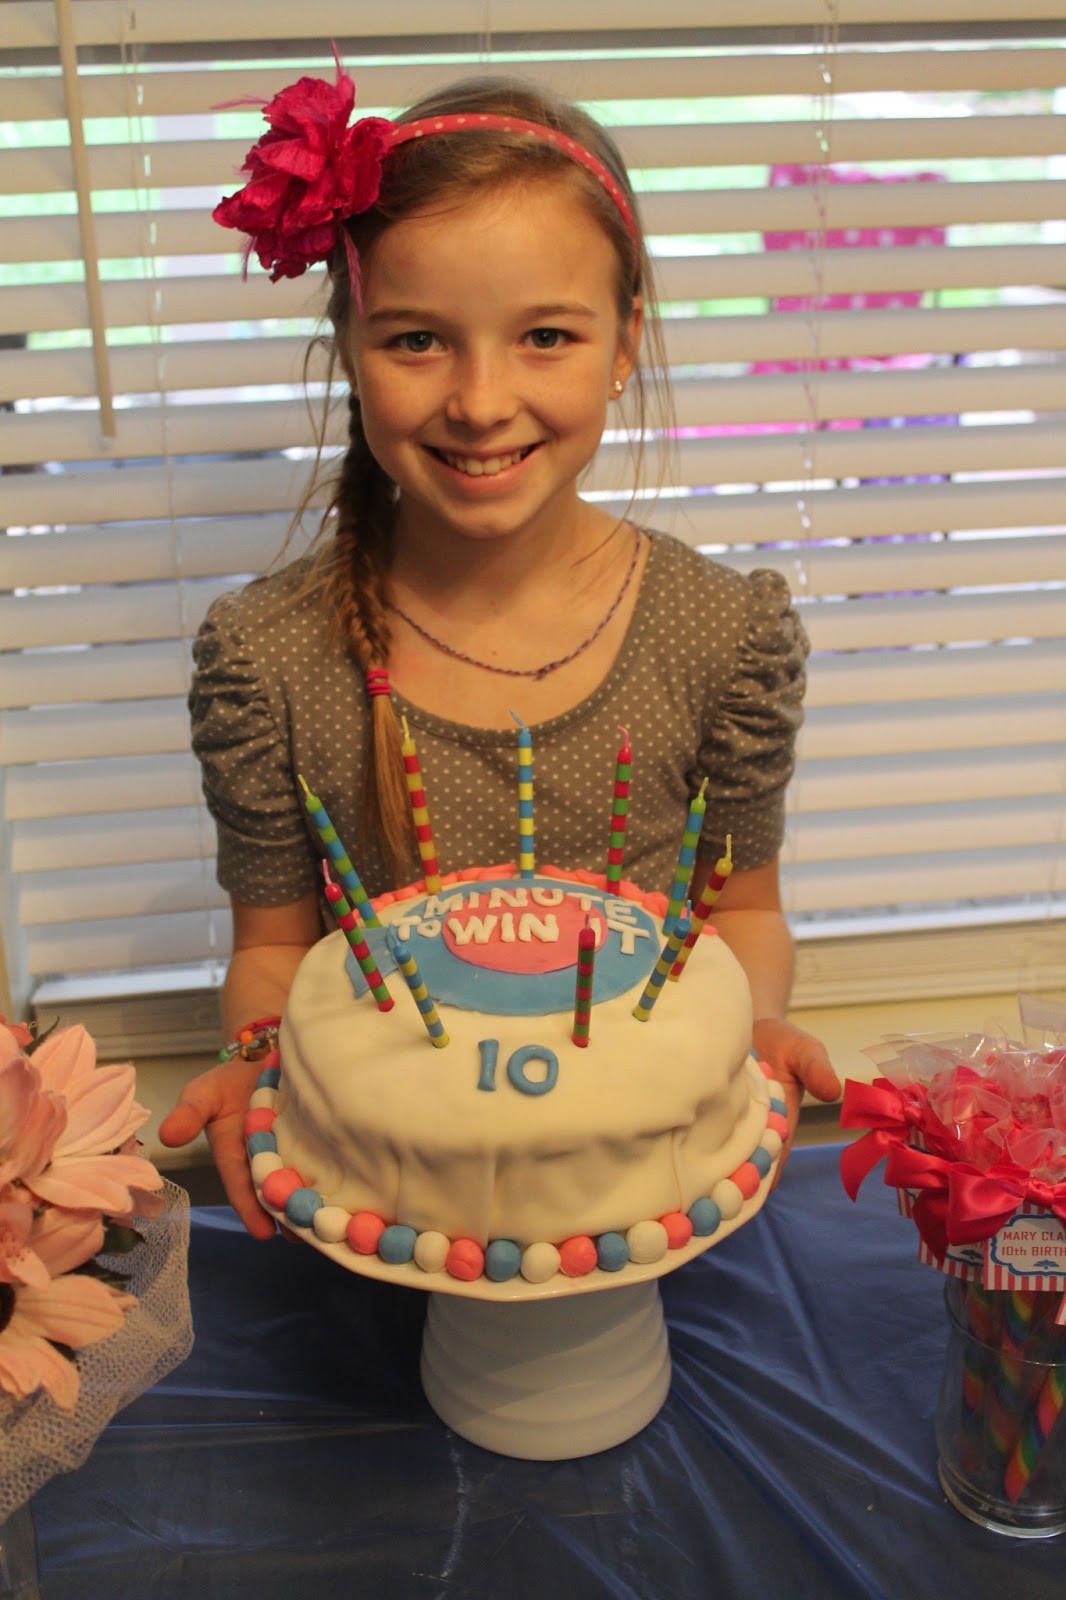 Birthday Party Ideas For 10 Year Old Girl
 Blair s Blessings 10 Year Old Minute to Win It Birthday Party